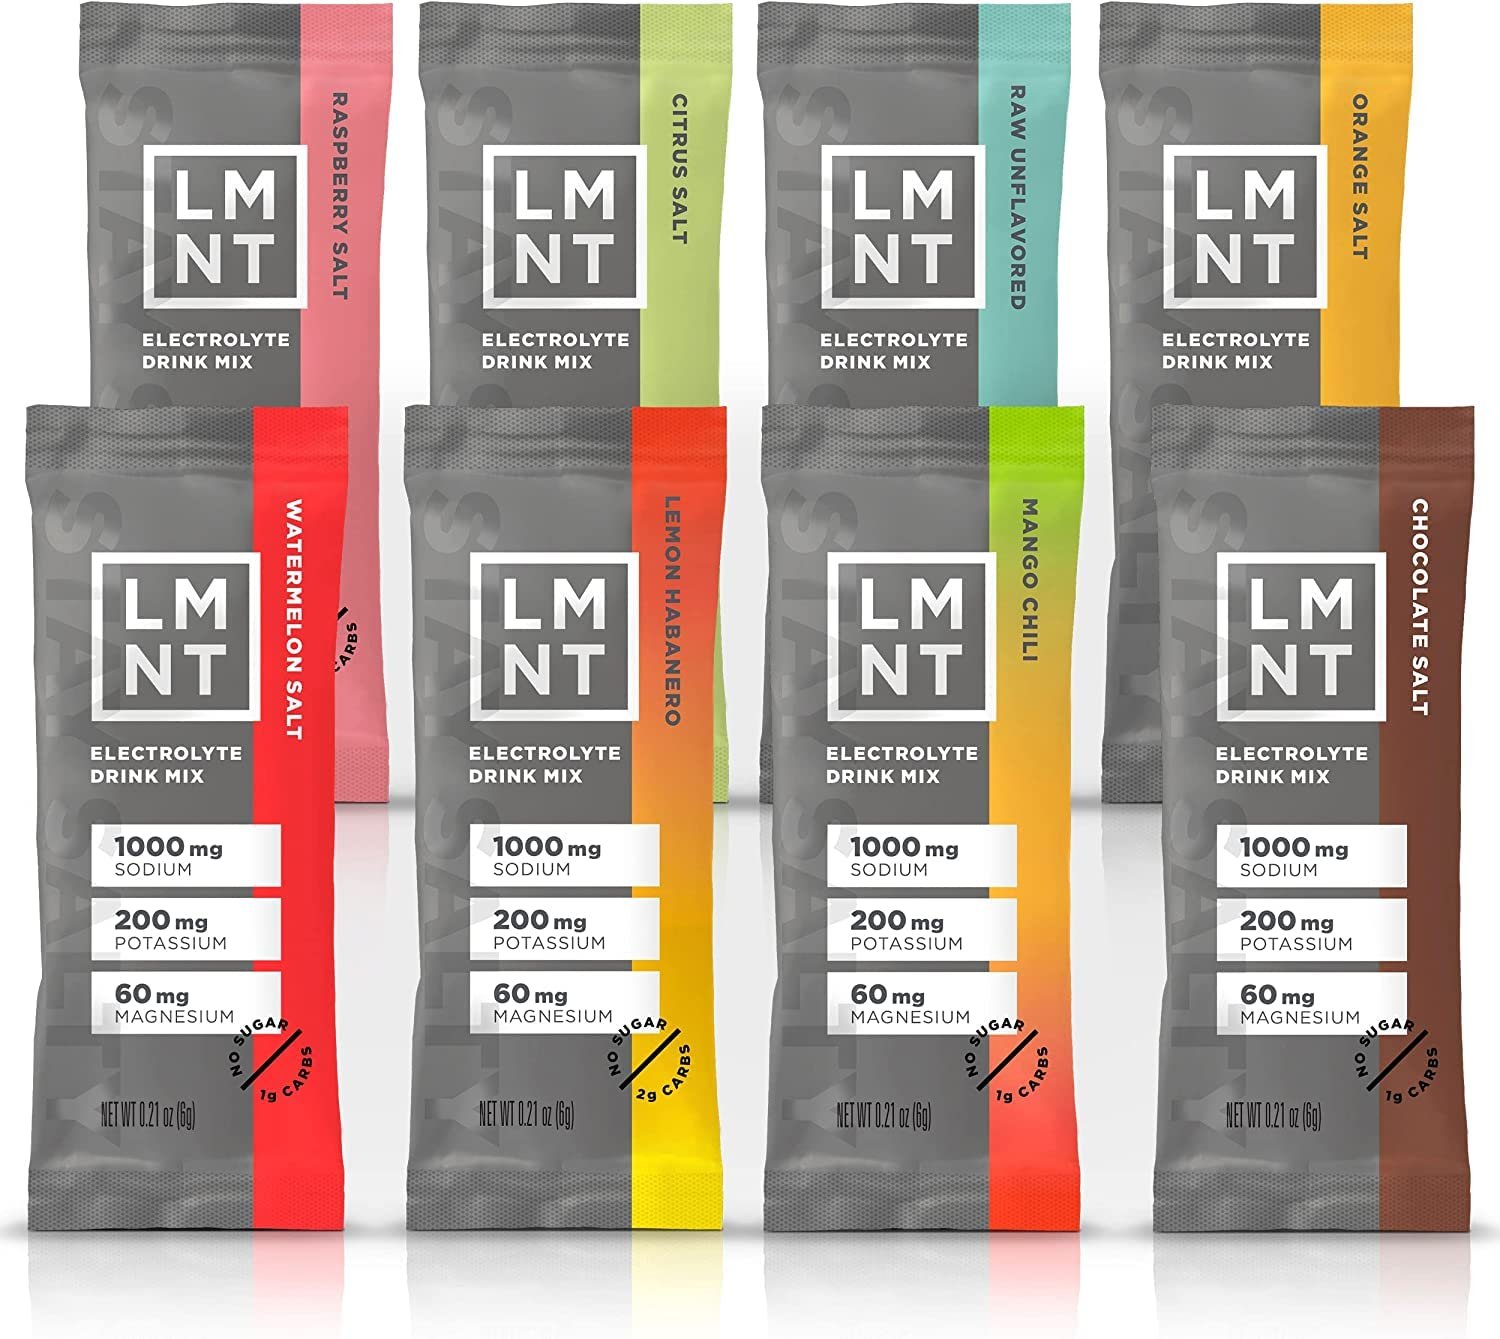 LMNT salt: free sample pack with purchase